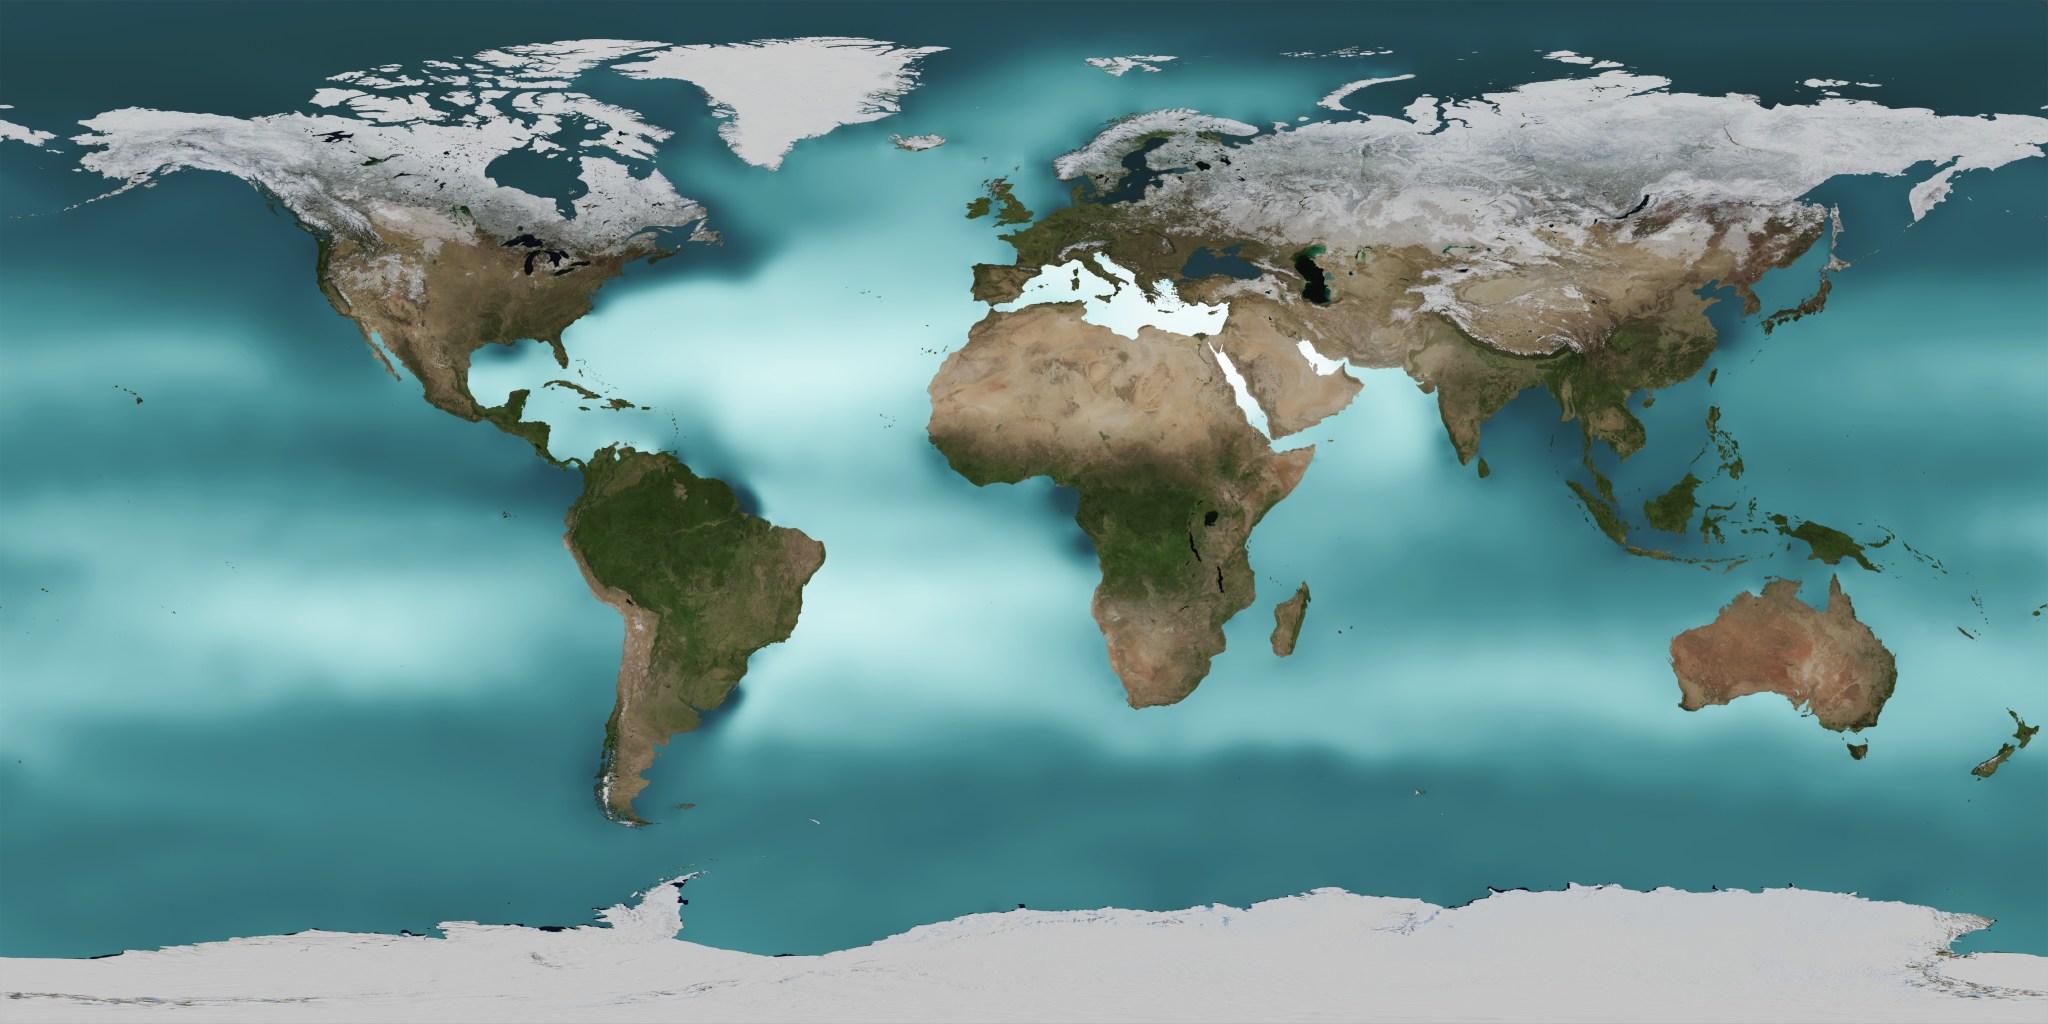 A map of Earth's surface highlighting sea surface salinity across the world's oceans. The land masses appear green, brown, and white. The oceans range in color from deep turquoise to almost white, with lighter areas representing higher salinity and darker areas representing lower. The light, high-salinity areas are mostly near the equator, with a wide band of low-salinity water near Antarctica.